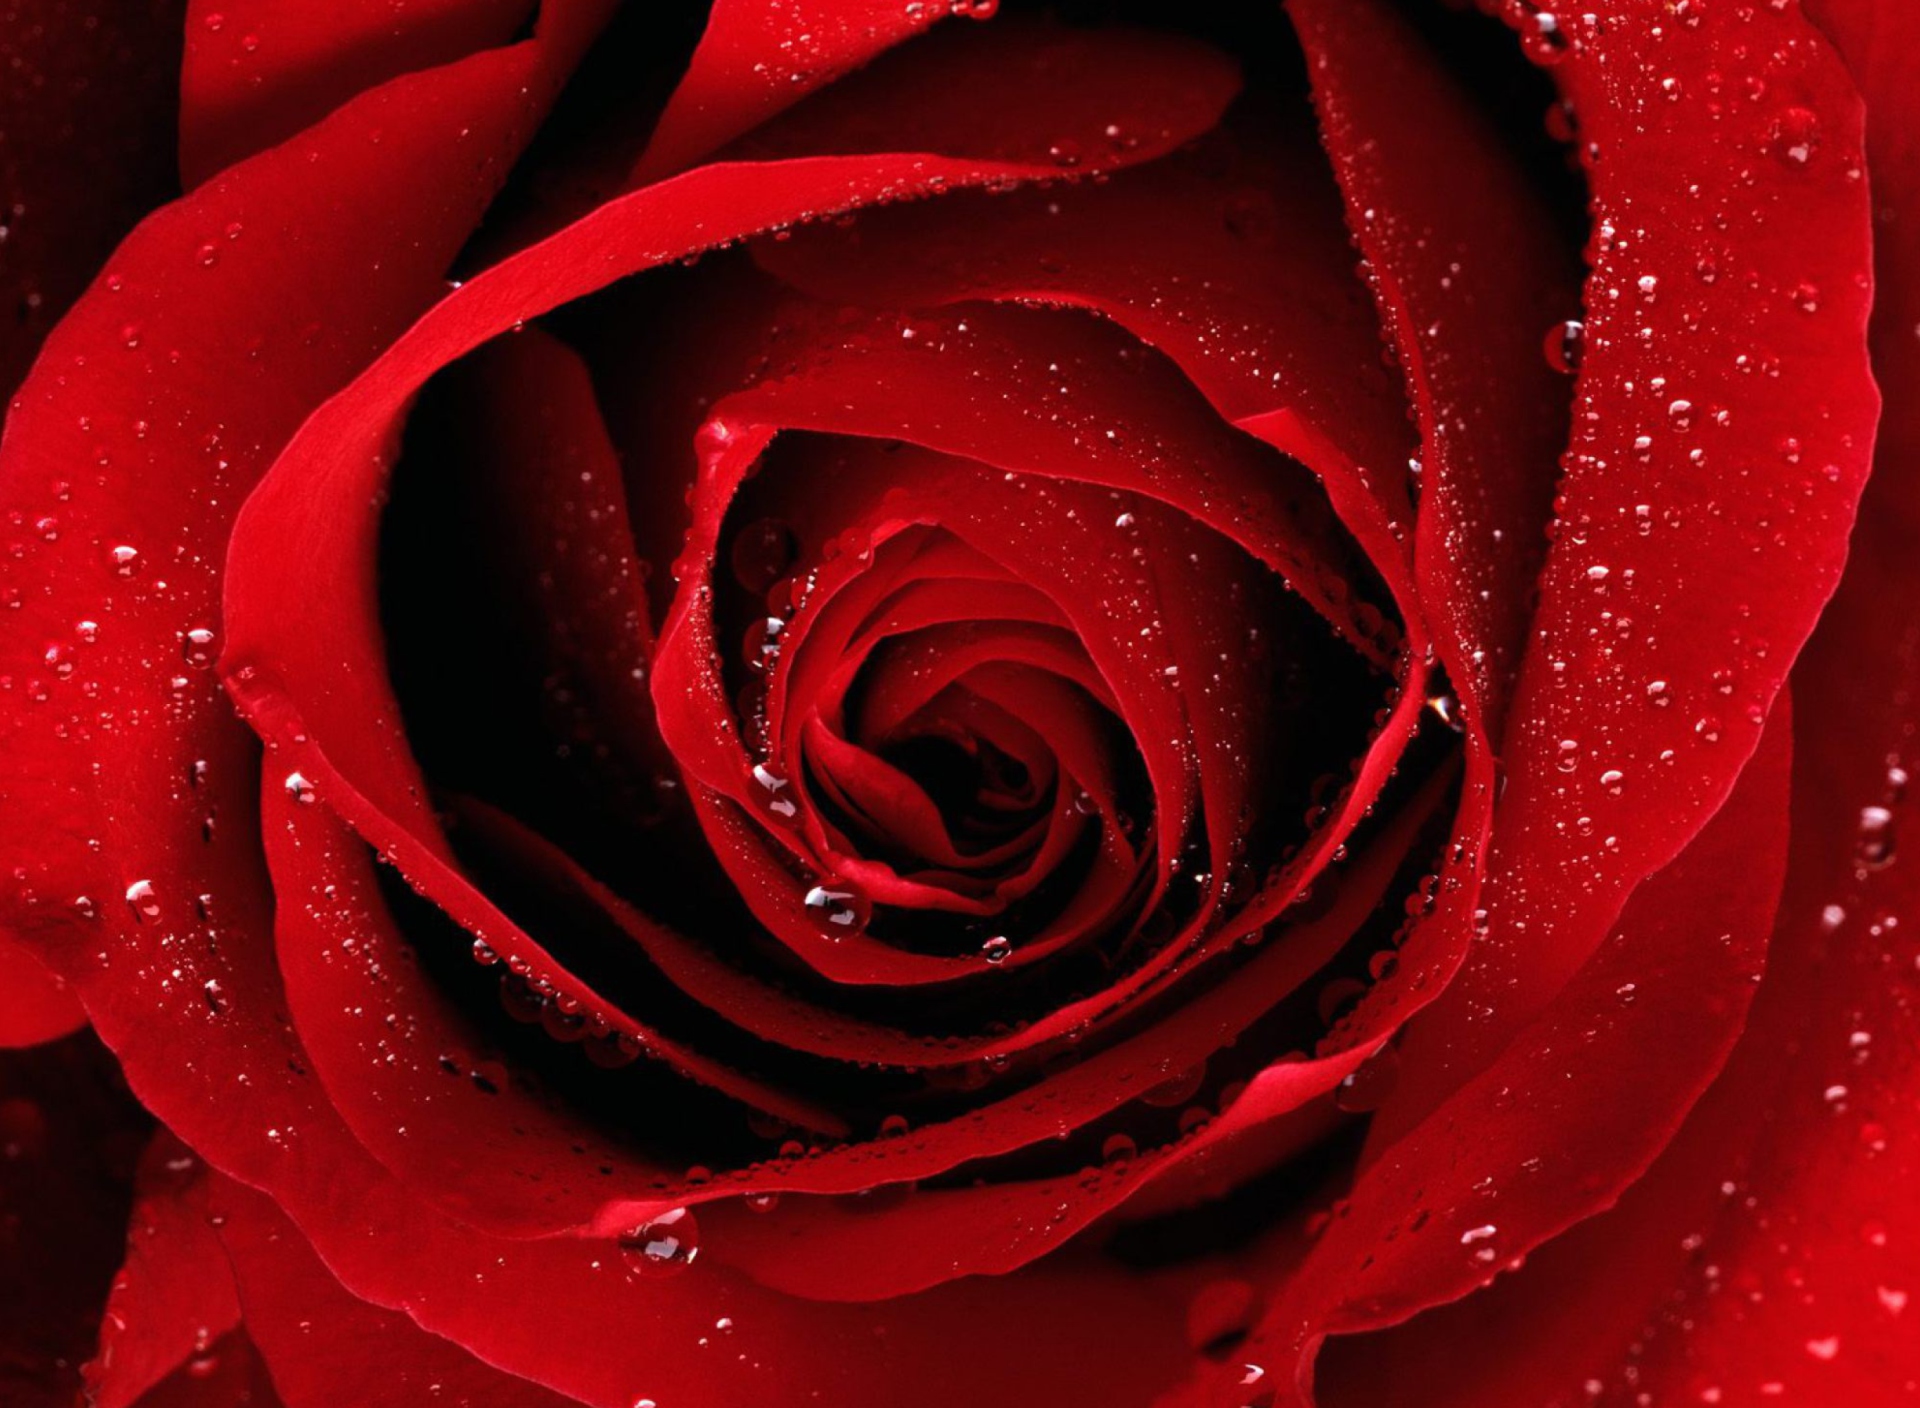 Scarlet Rose With Water Drops wallpaper 1920x1408